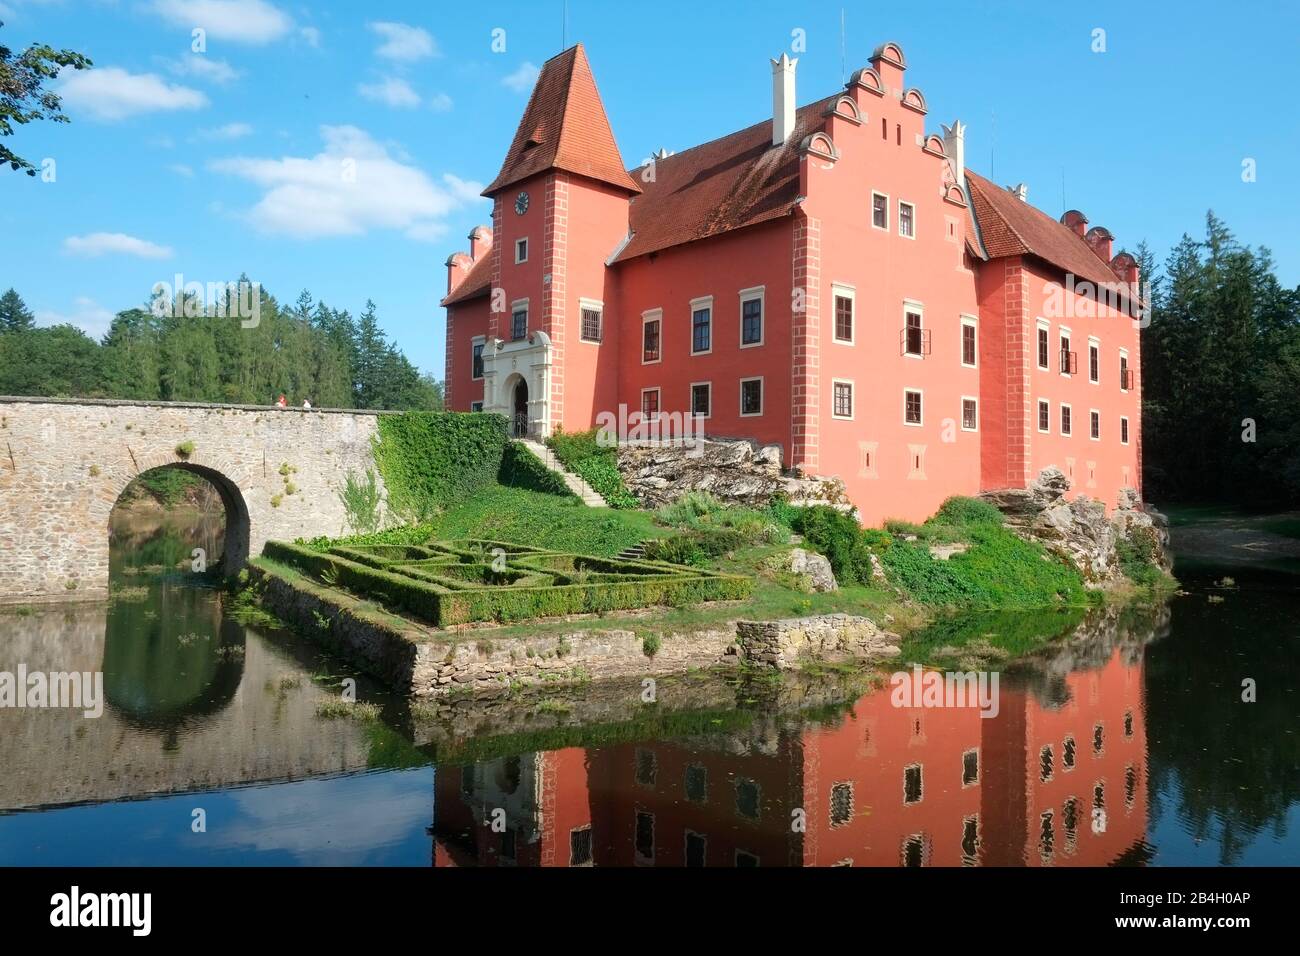 Cervena Lhota Chateau, Czech Republic. The summer house rebuilt from the Gothic fort in the 16th century was a place of amusement, celebrations and leisure. Stock Photo